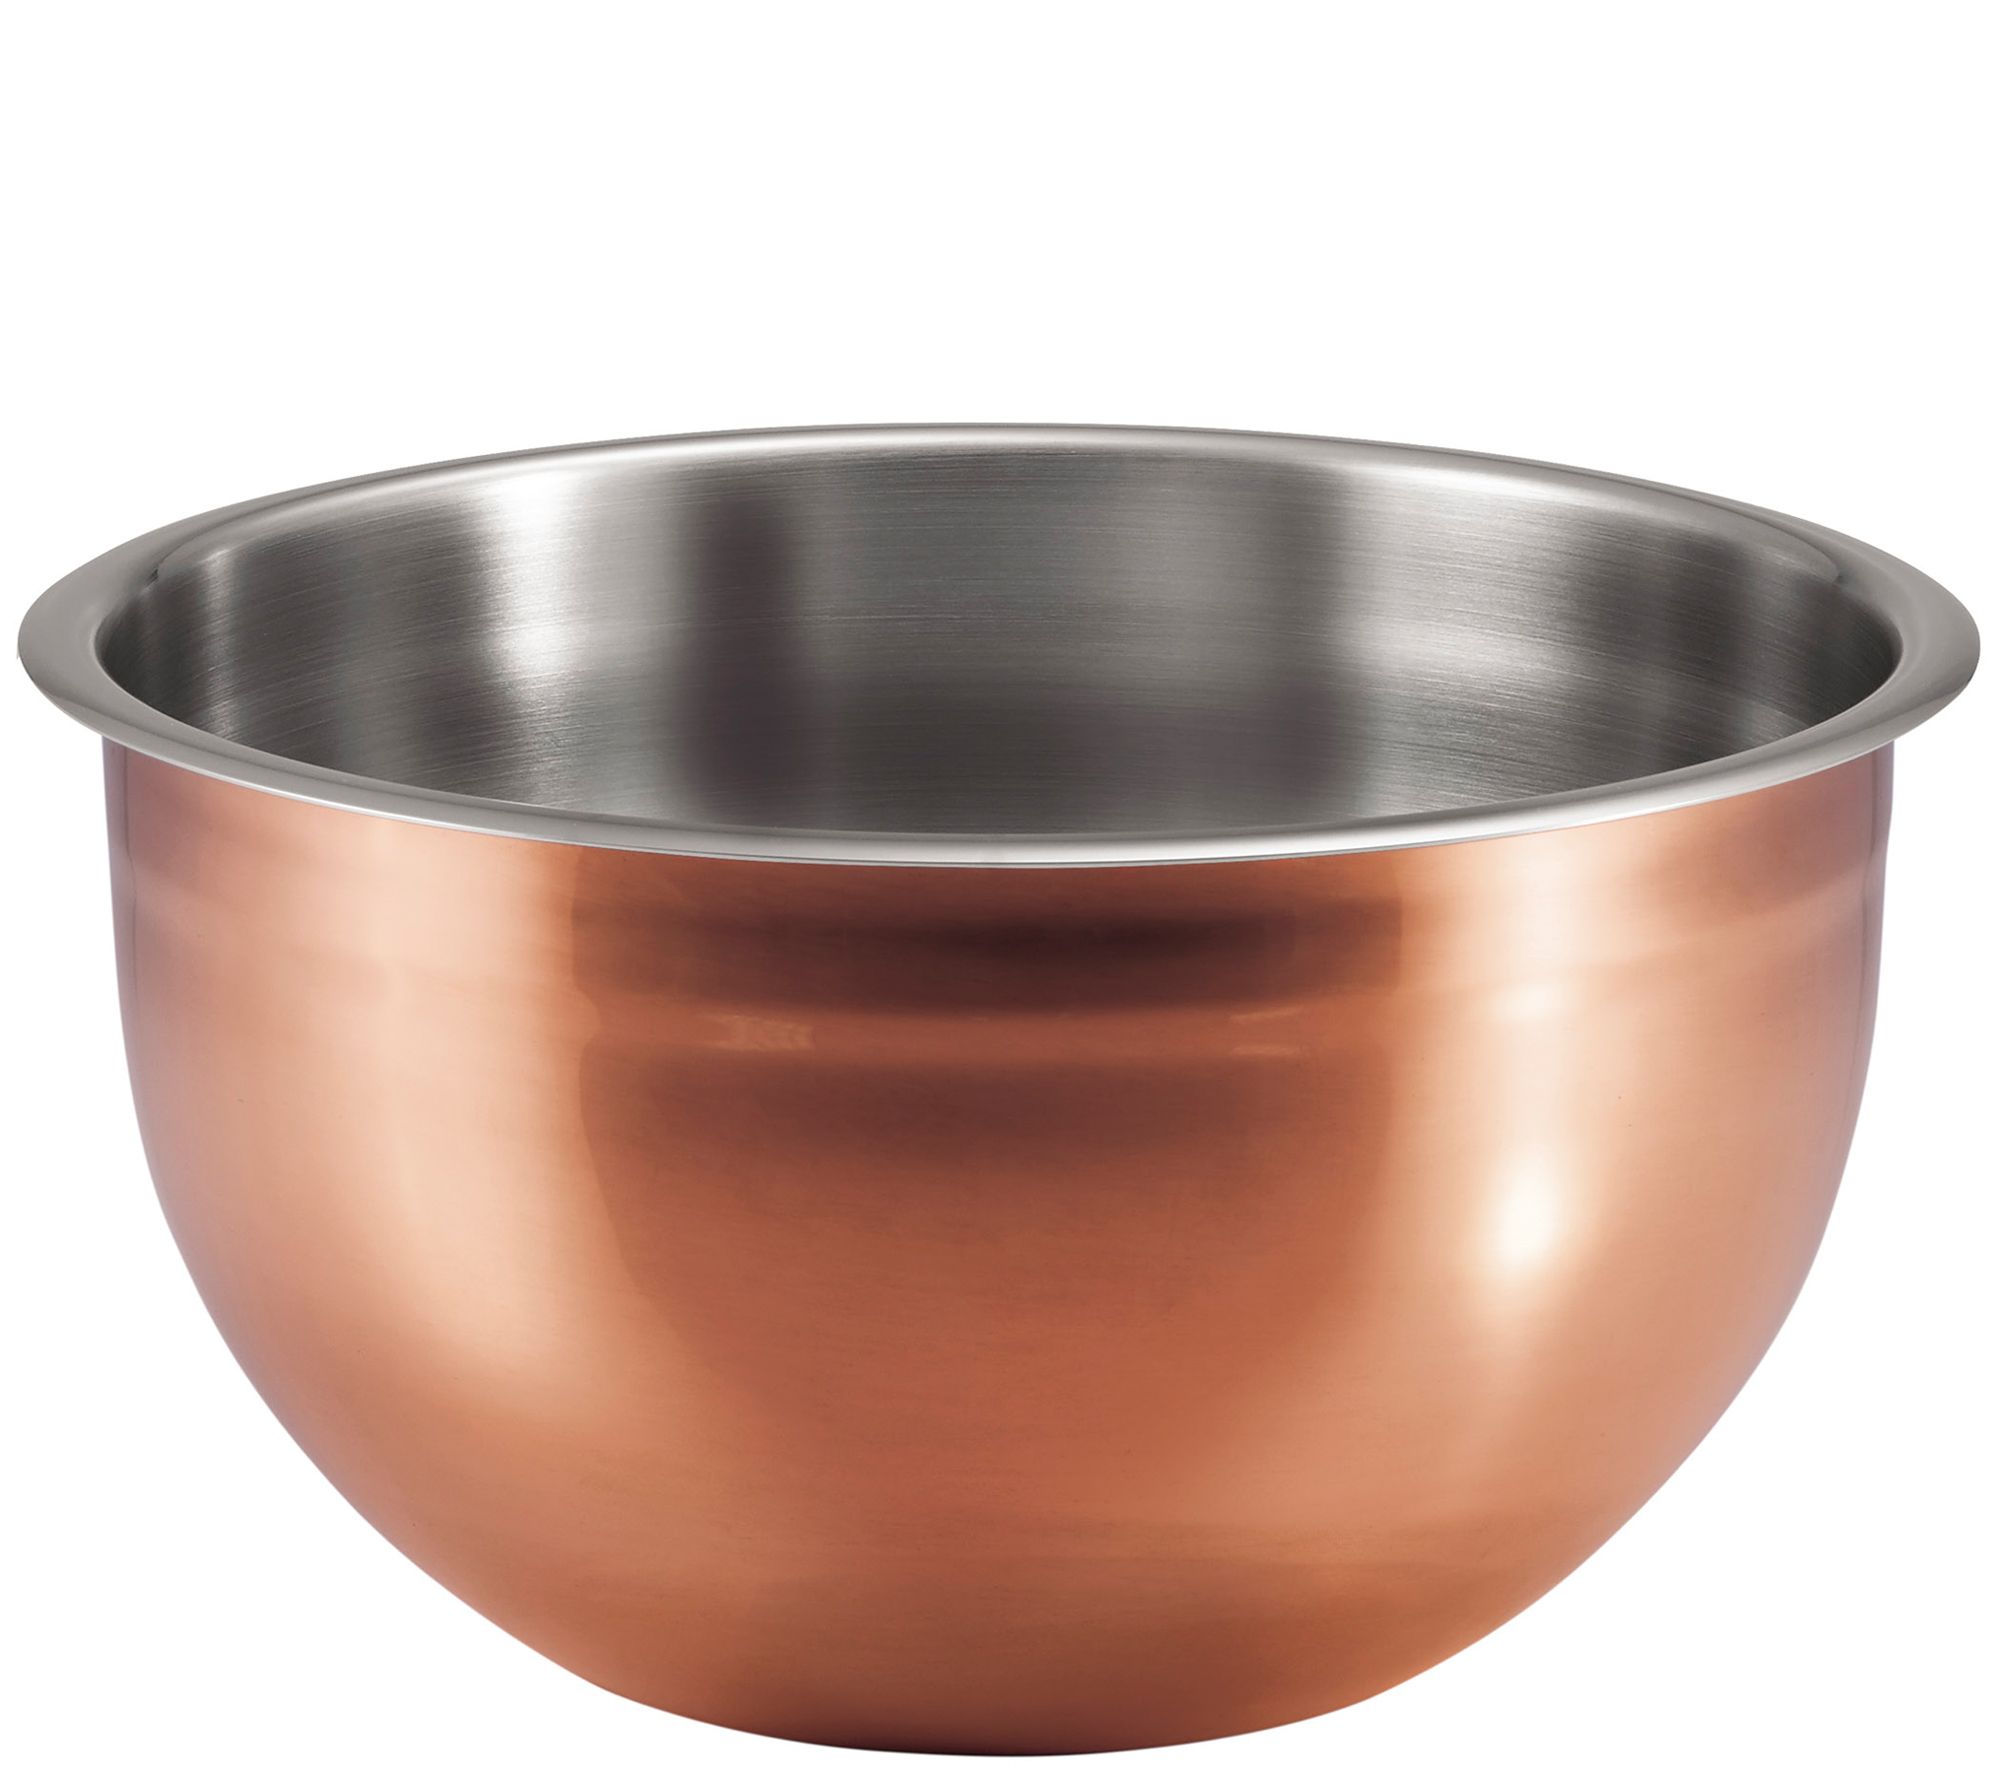 Tramontina Gourmet 8 qt. Stainless Steel Mixing Bowl